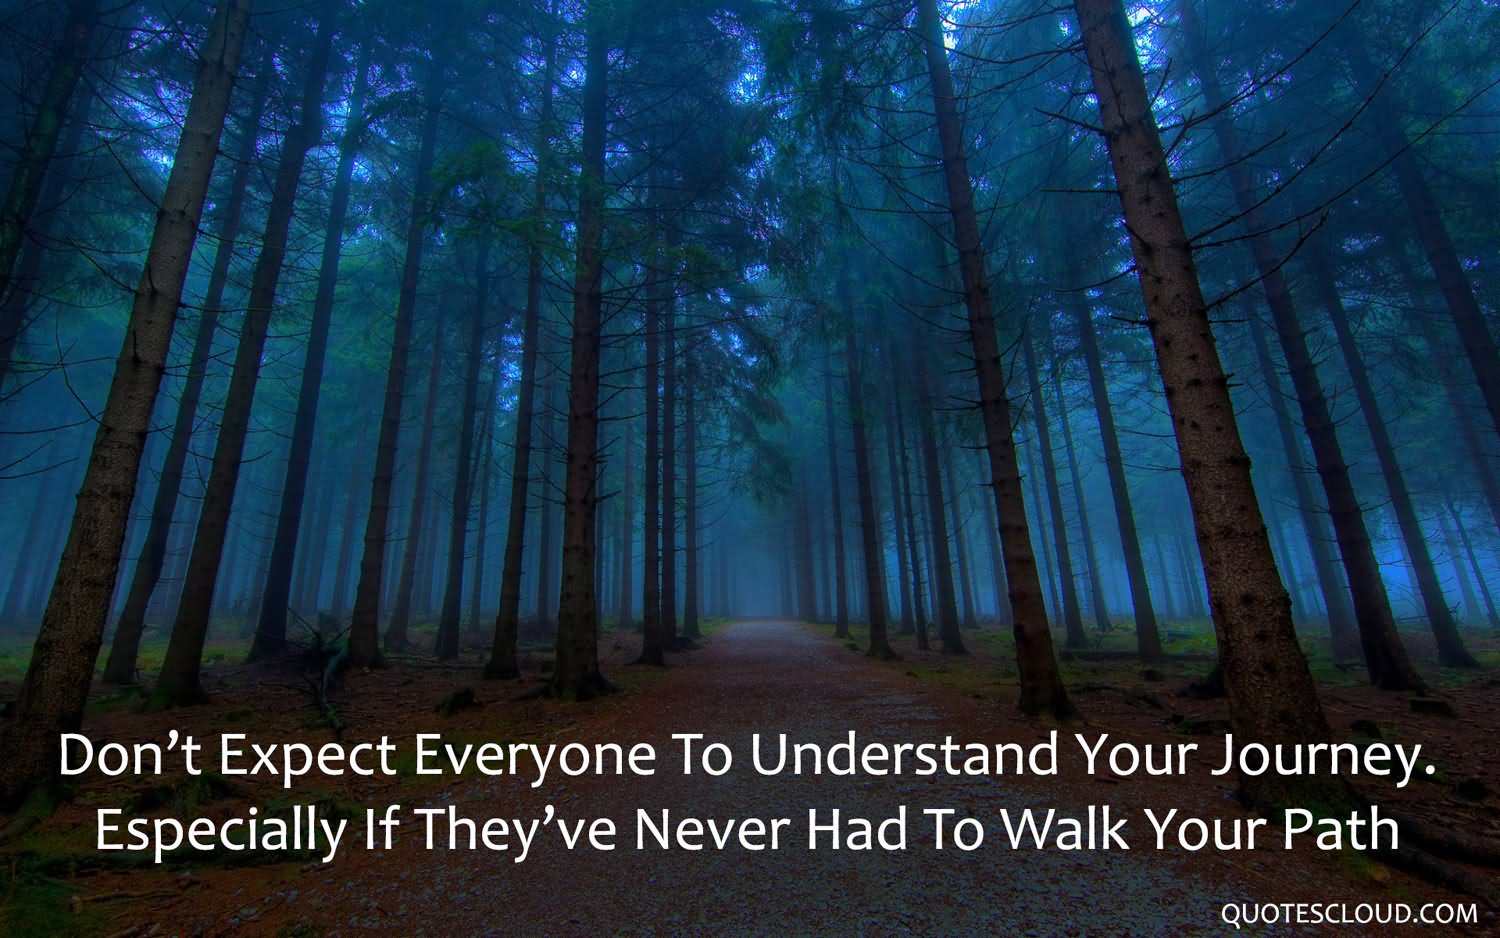 Don't expect everyone to understand your journey, especially if they have never had to walk your path.